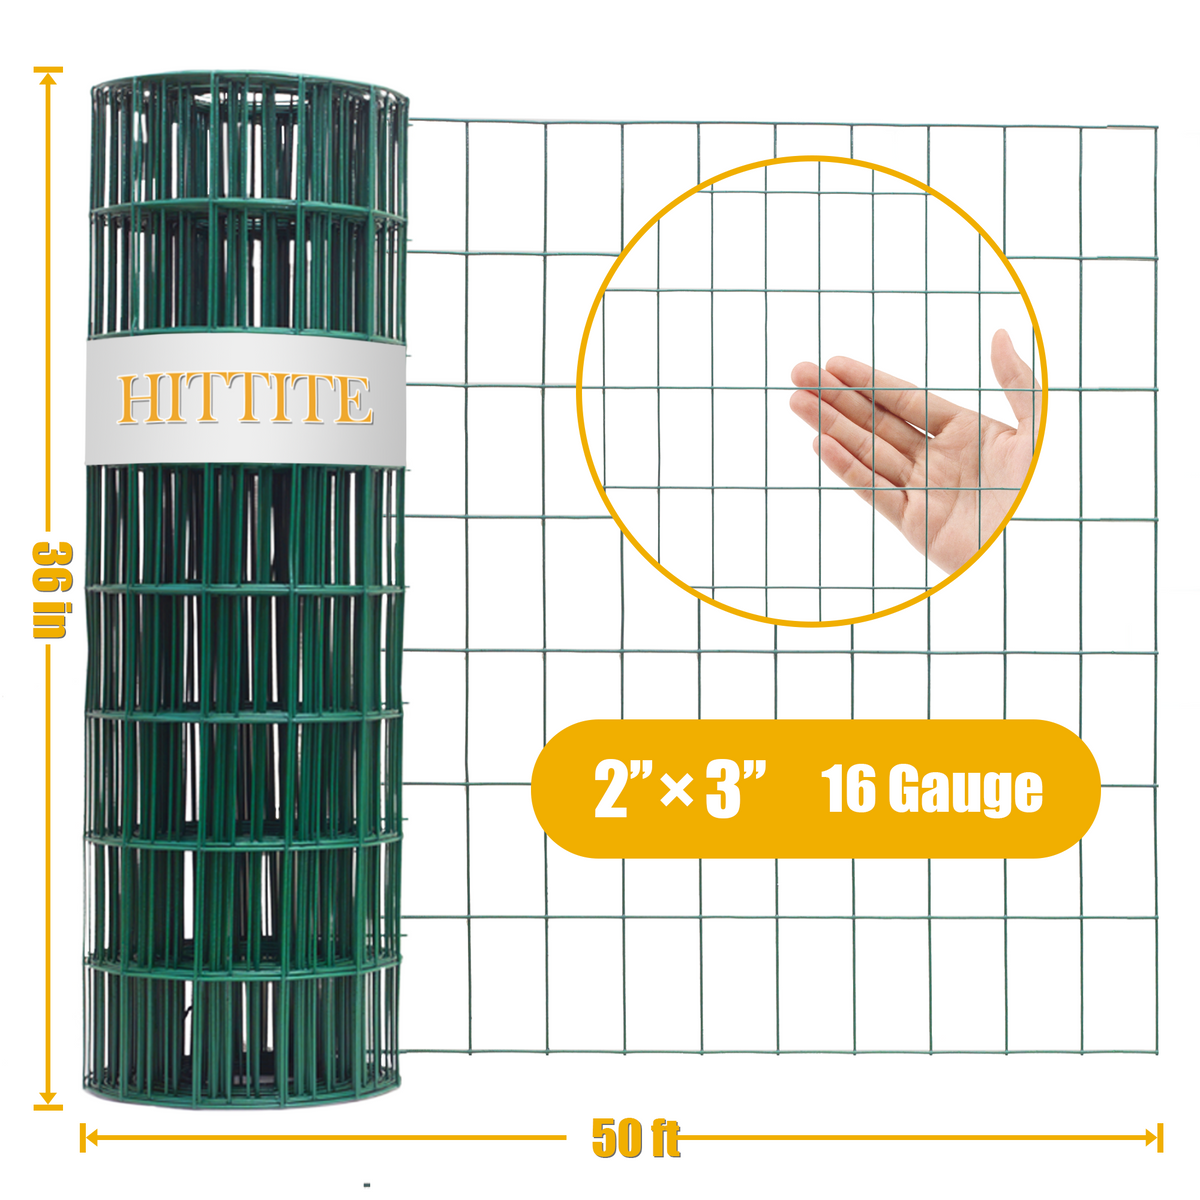 HITTITE Green PVC Coated Welded Wire Fencing, 60in x 50ft, 2 inch x 3 inch 16 GA Welded Wire Fence Rolls, Black Metal Garden Fence Wire Roll Garden Border Fencing for Yard Vegetable Plant Protection